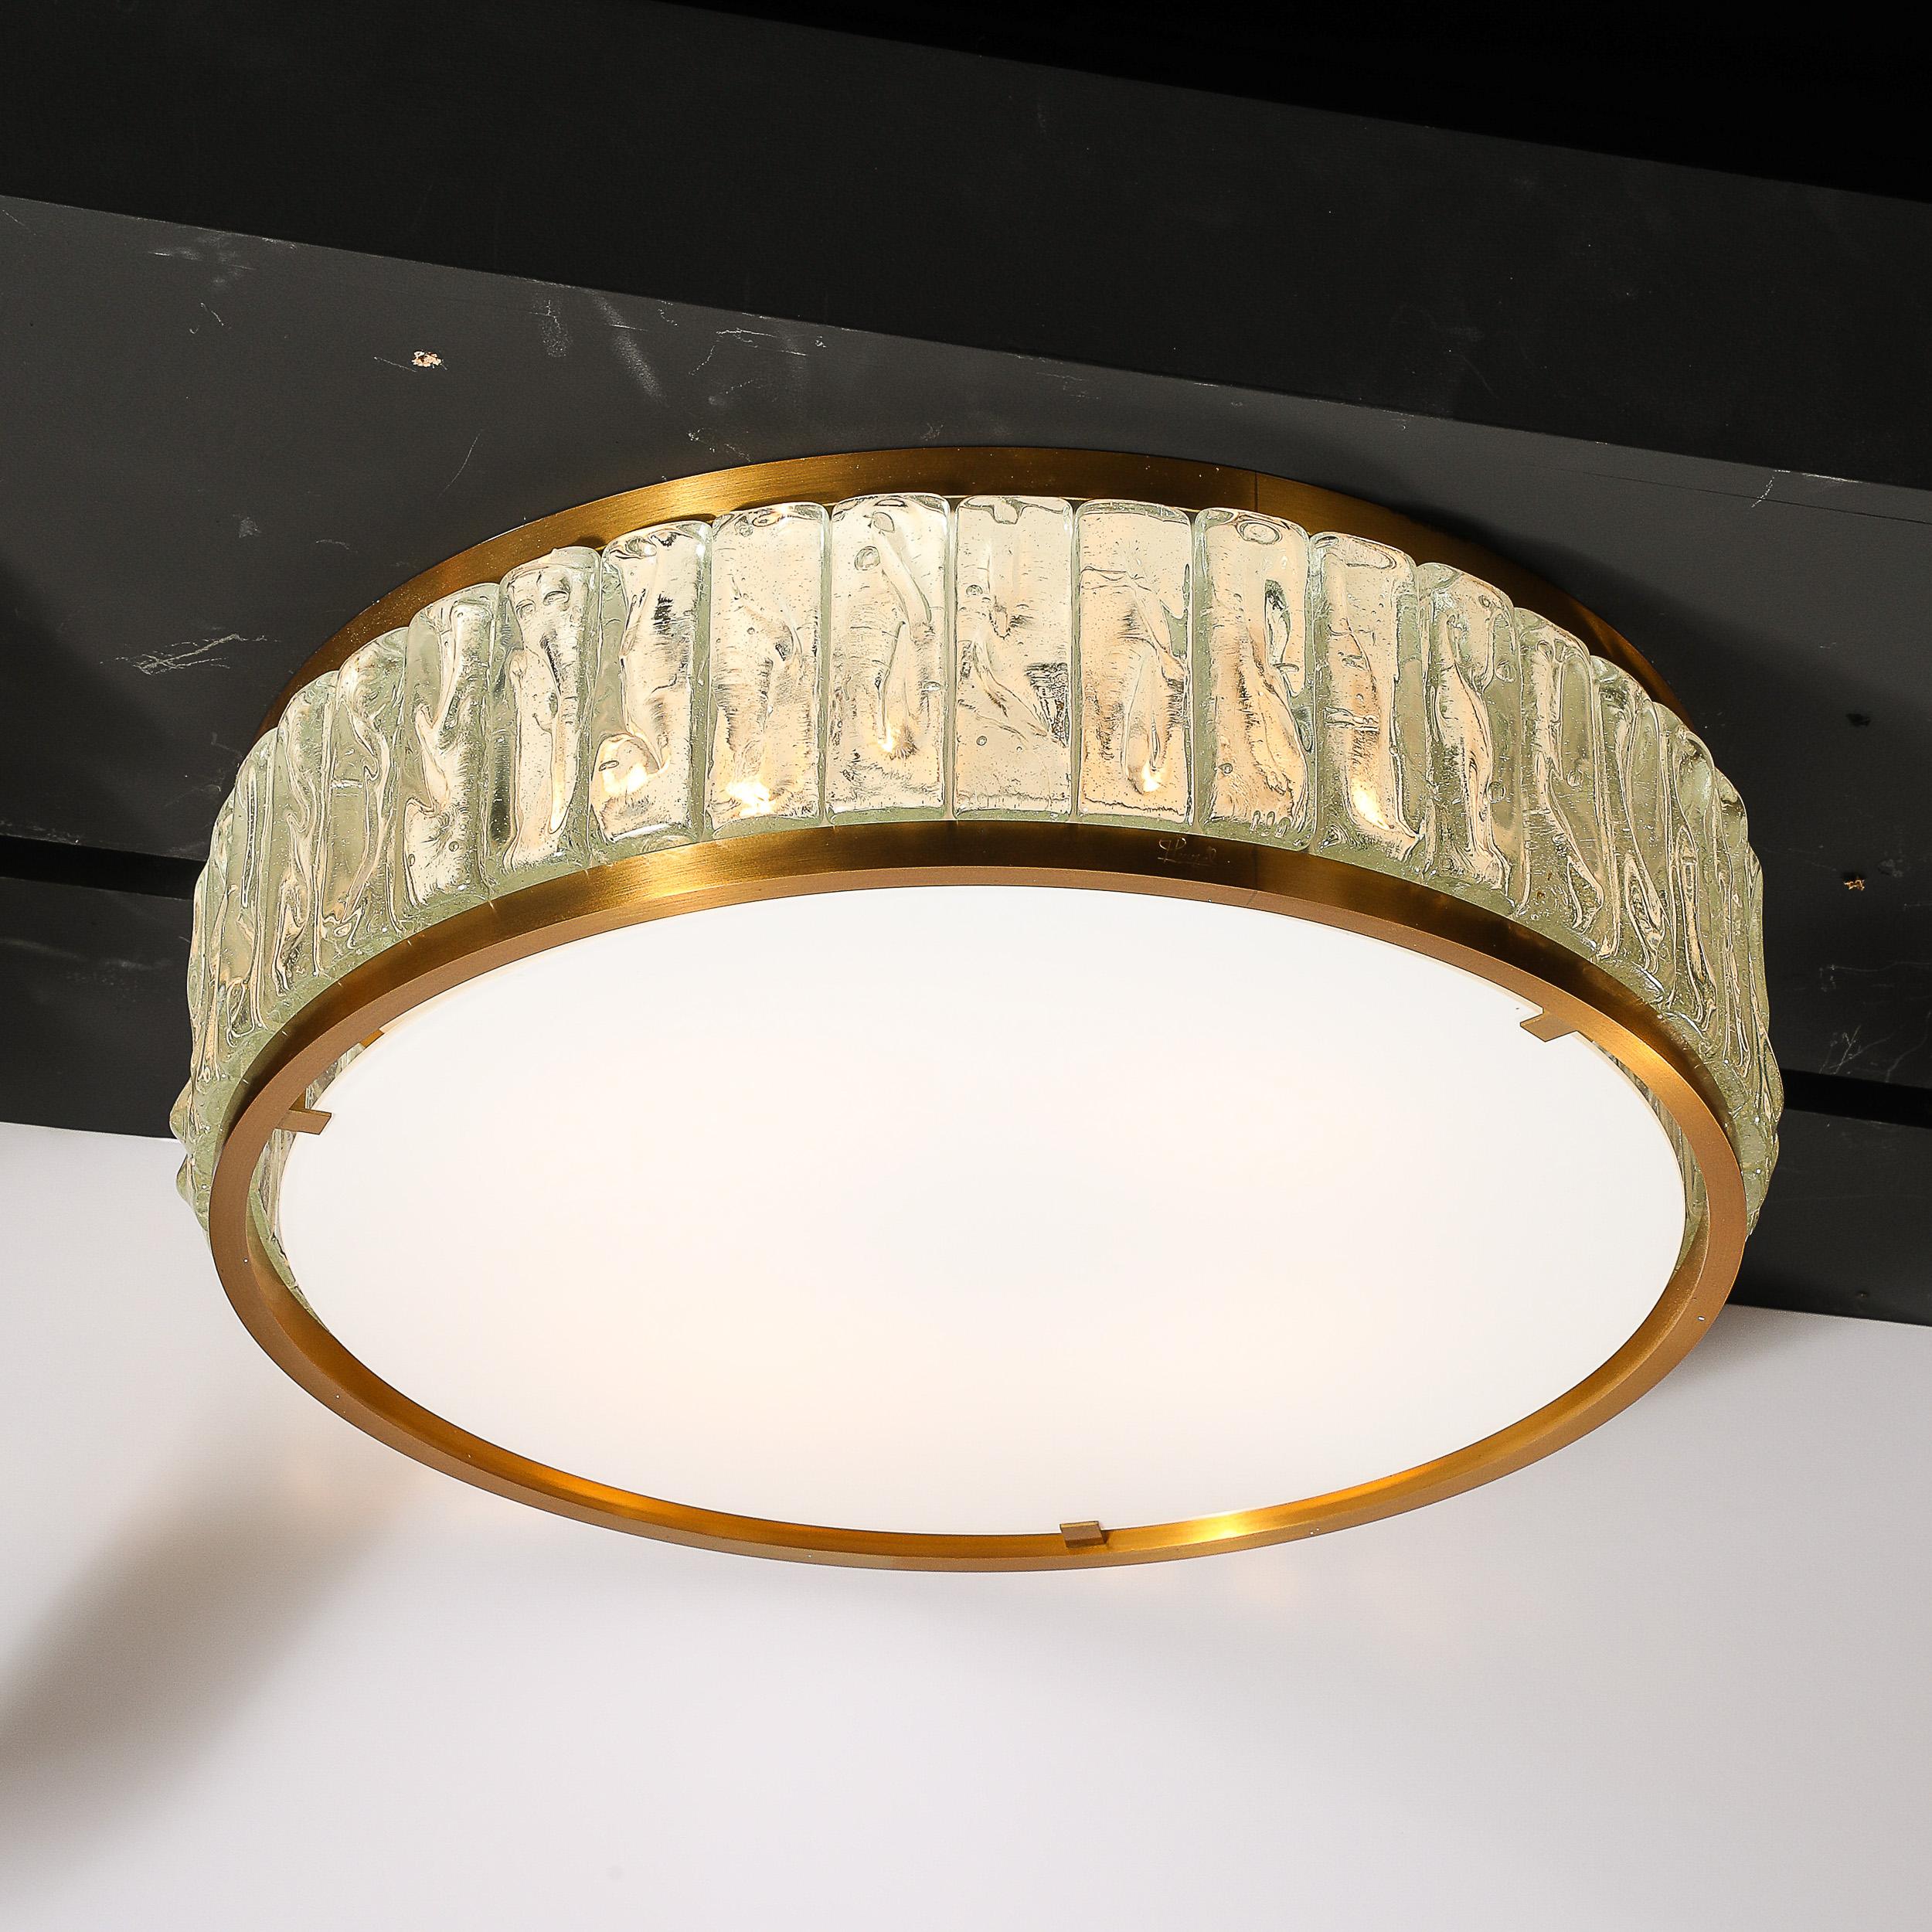 This sophisticated and materially exquisite Mid-Century Modernist Round Flush Mount Chandelier in Textured & Frosted Glass with Brass Fittings is signed Jean Perzel and originates from France during the latter half of the 20th Century. Features a